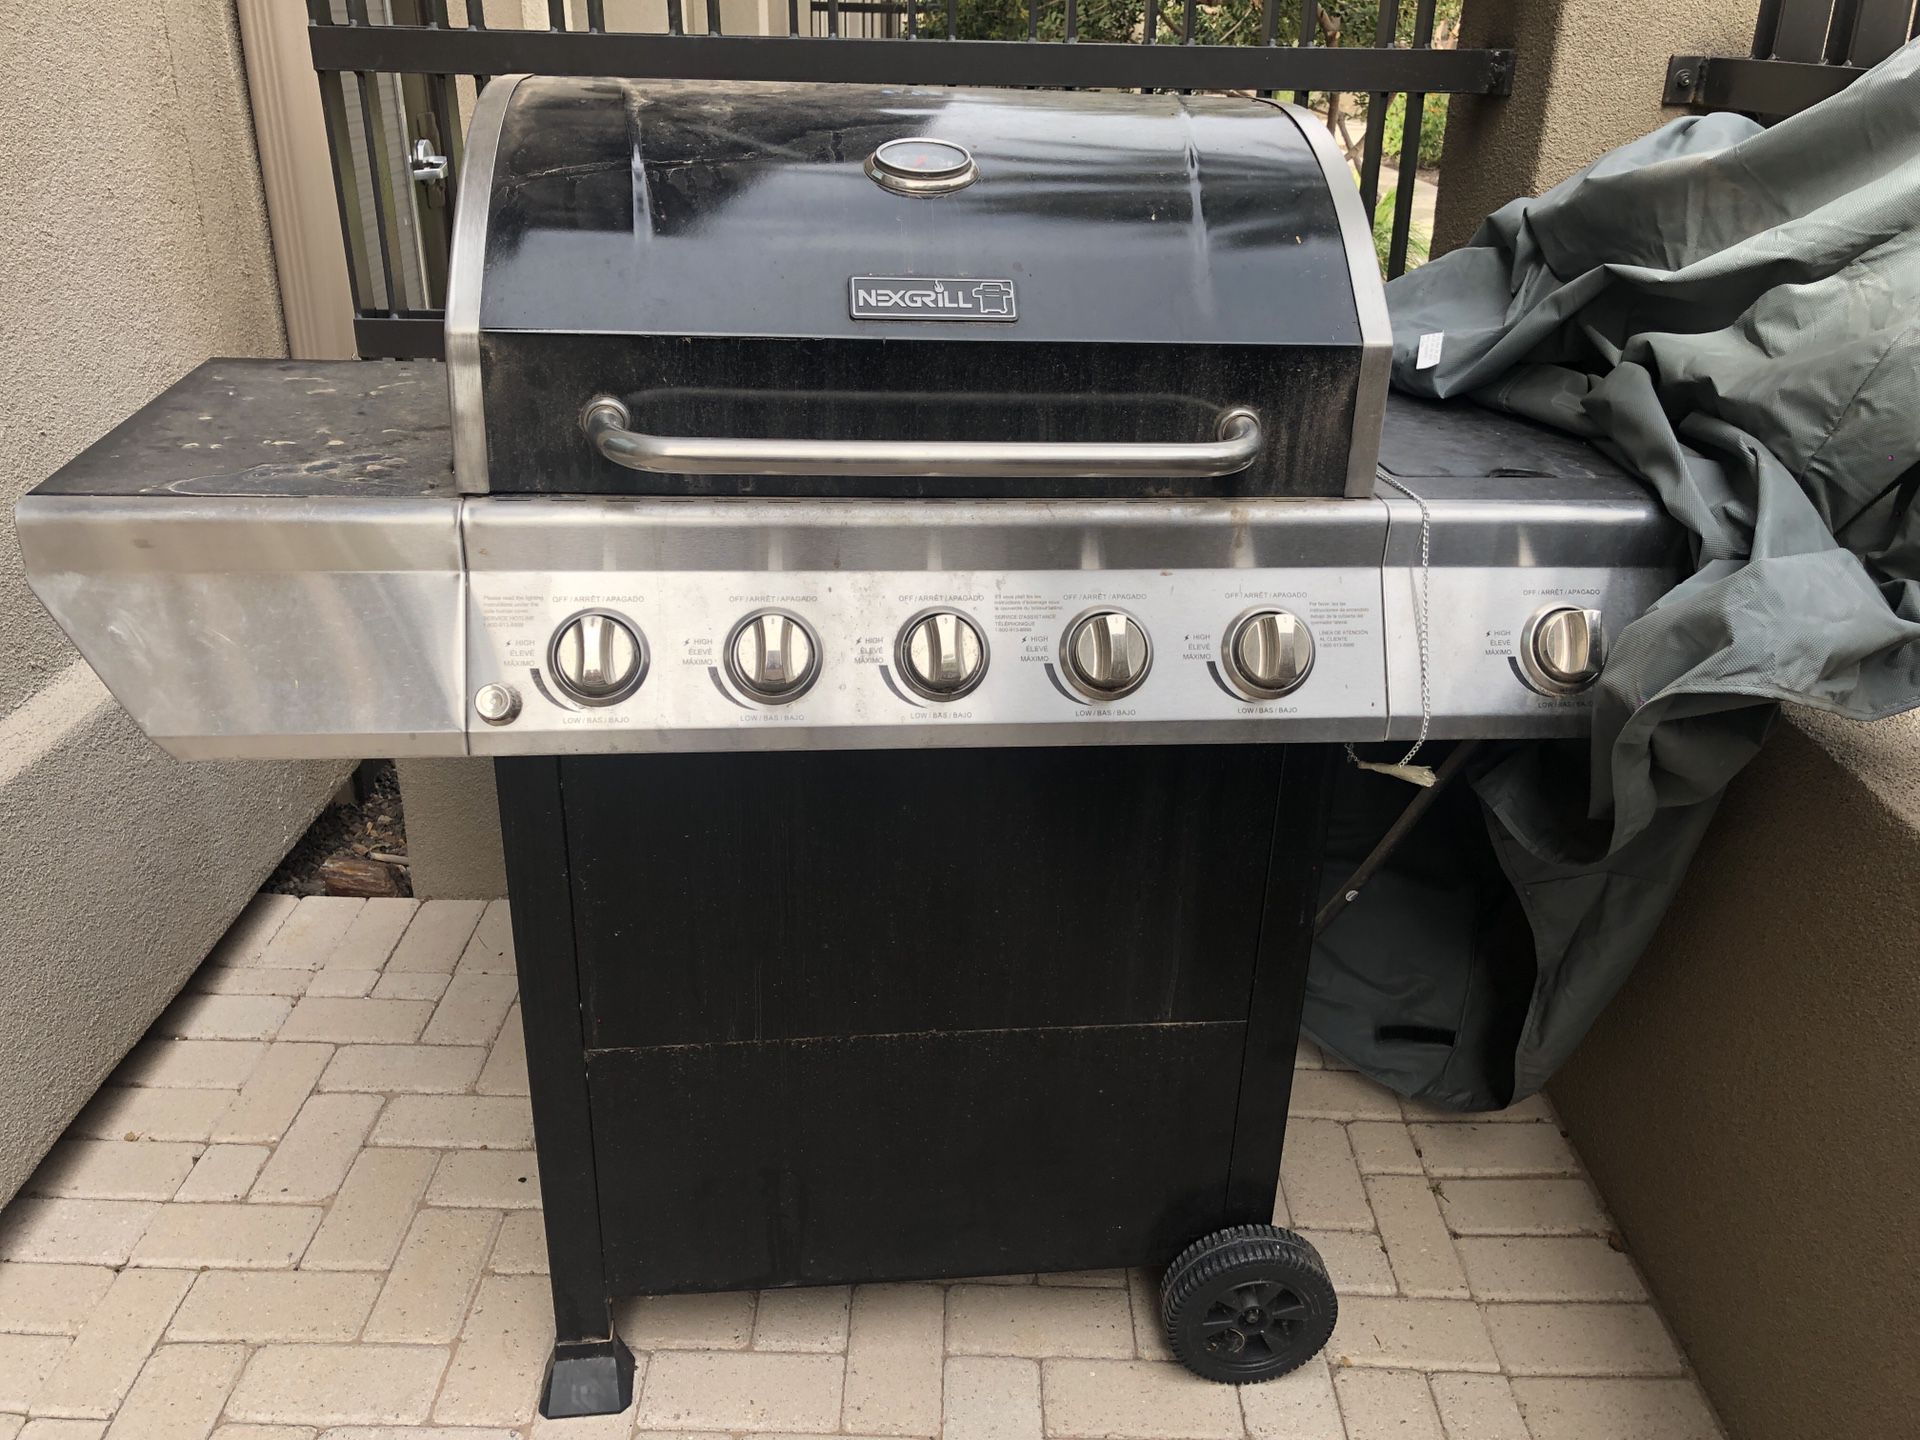 Nexgrill 5 Burner Propane Gas Grill with Side Burner and Cover